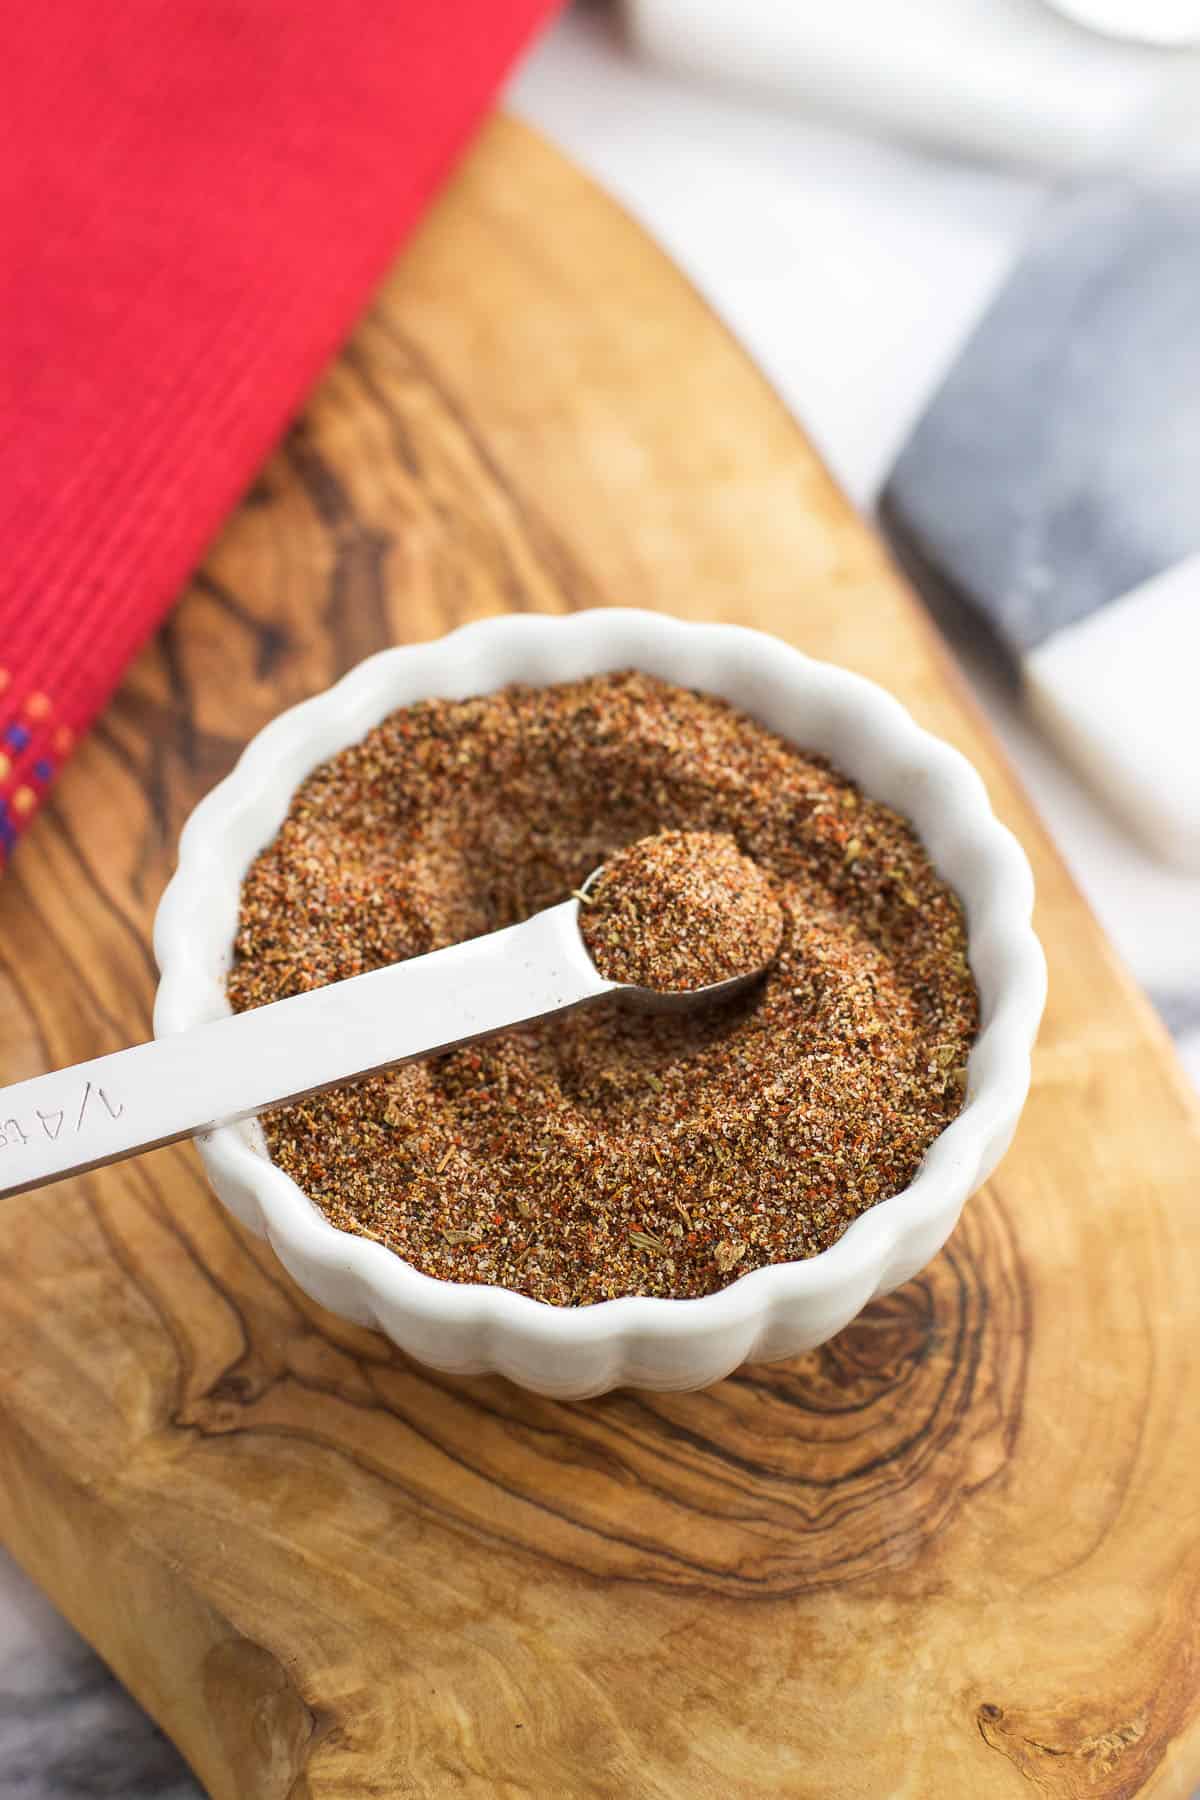 A small measuring spoon dipped into a bowl of taco seasoning.